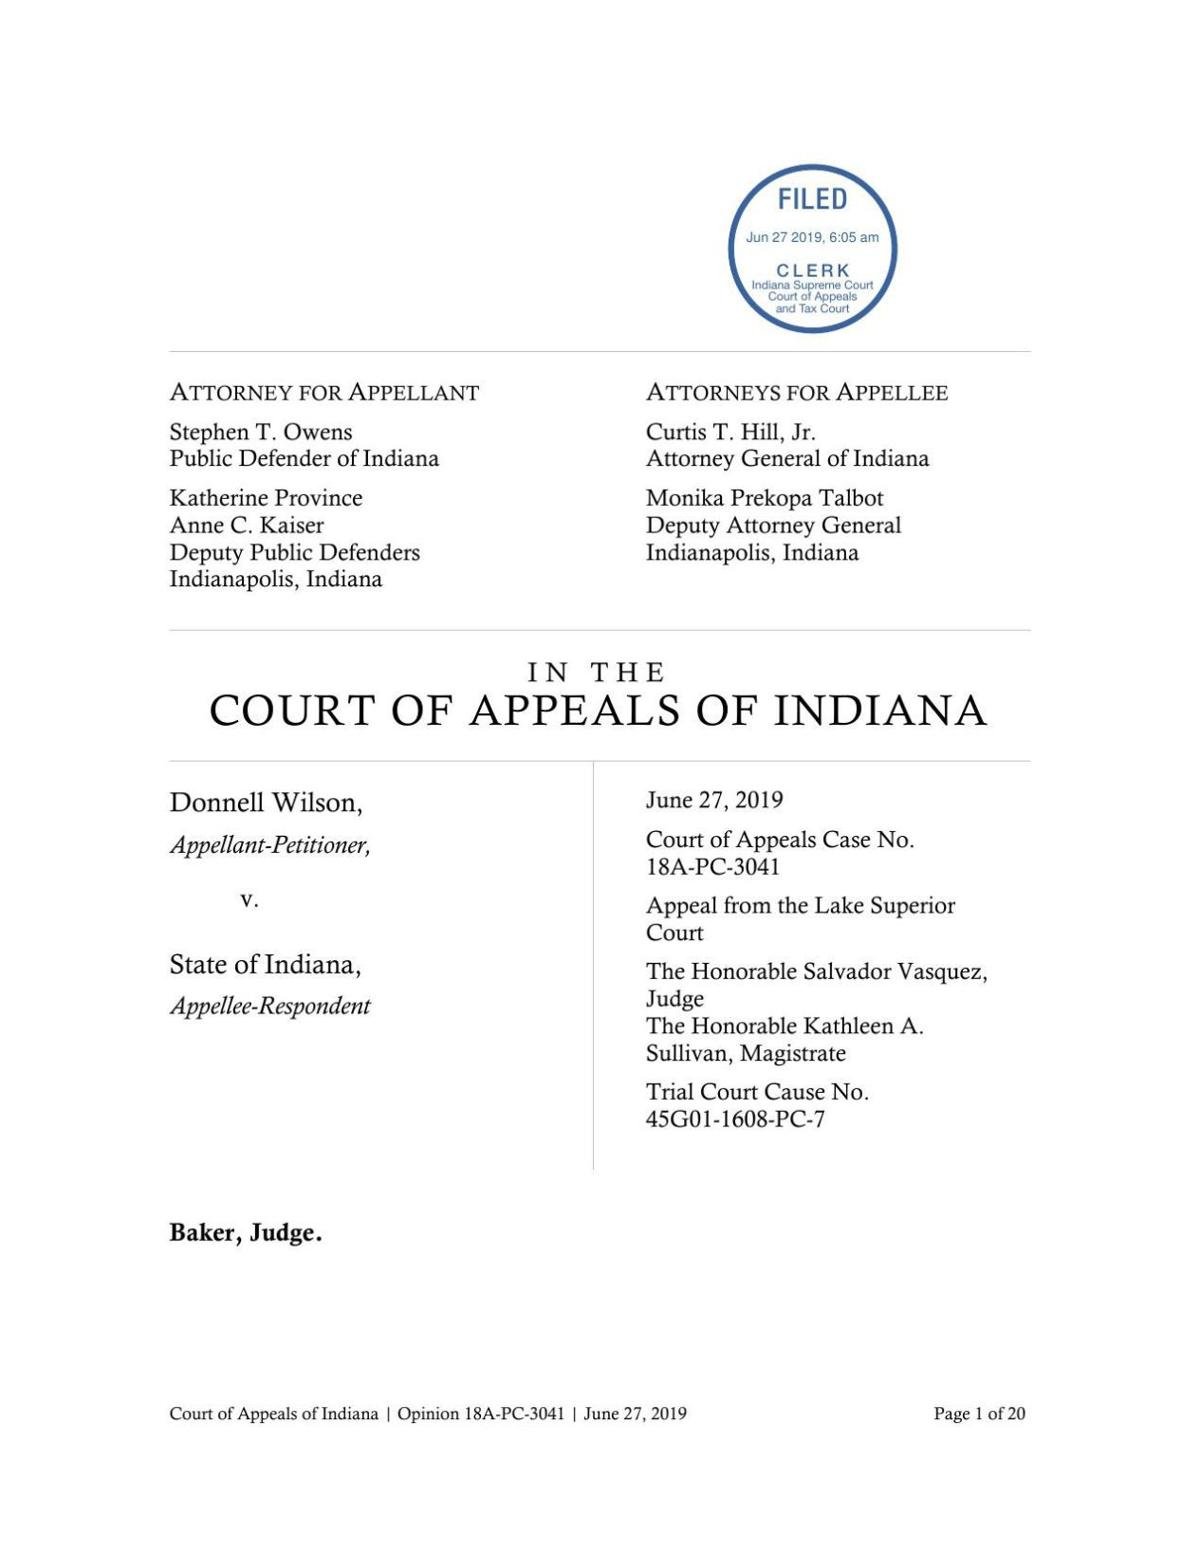 Indiana Supreme Court to decide validity of 183 year prison term issued